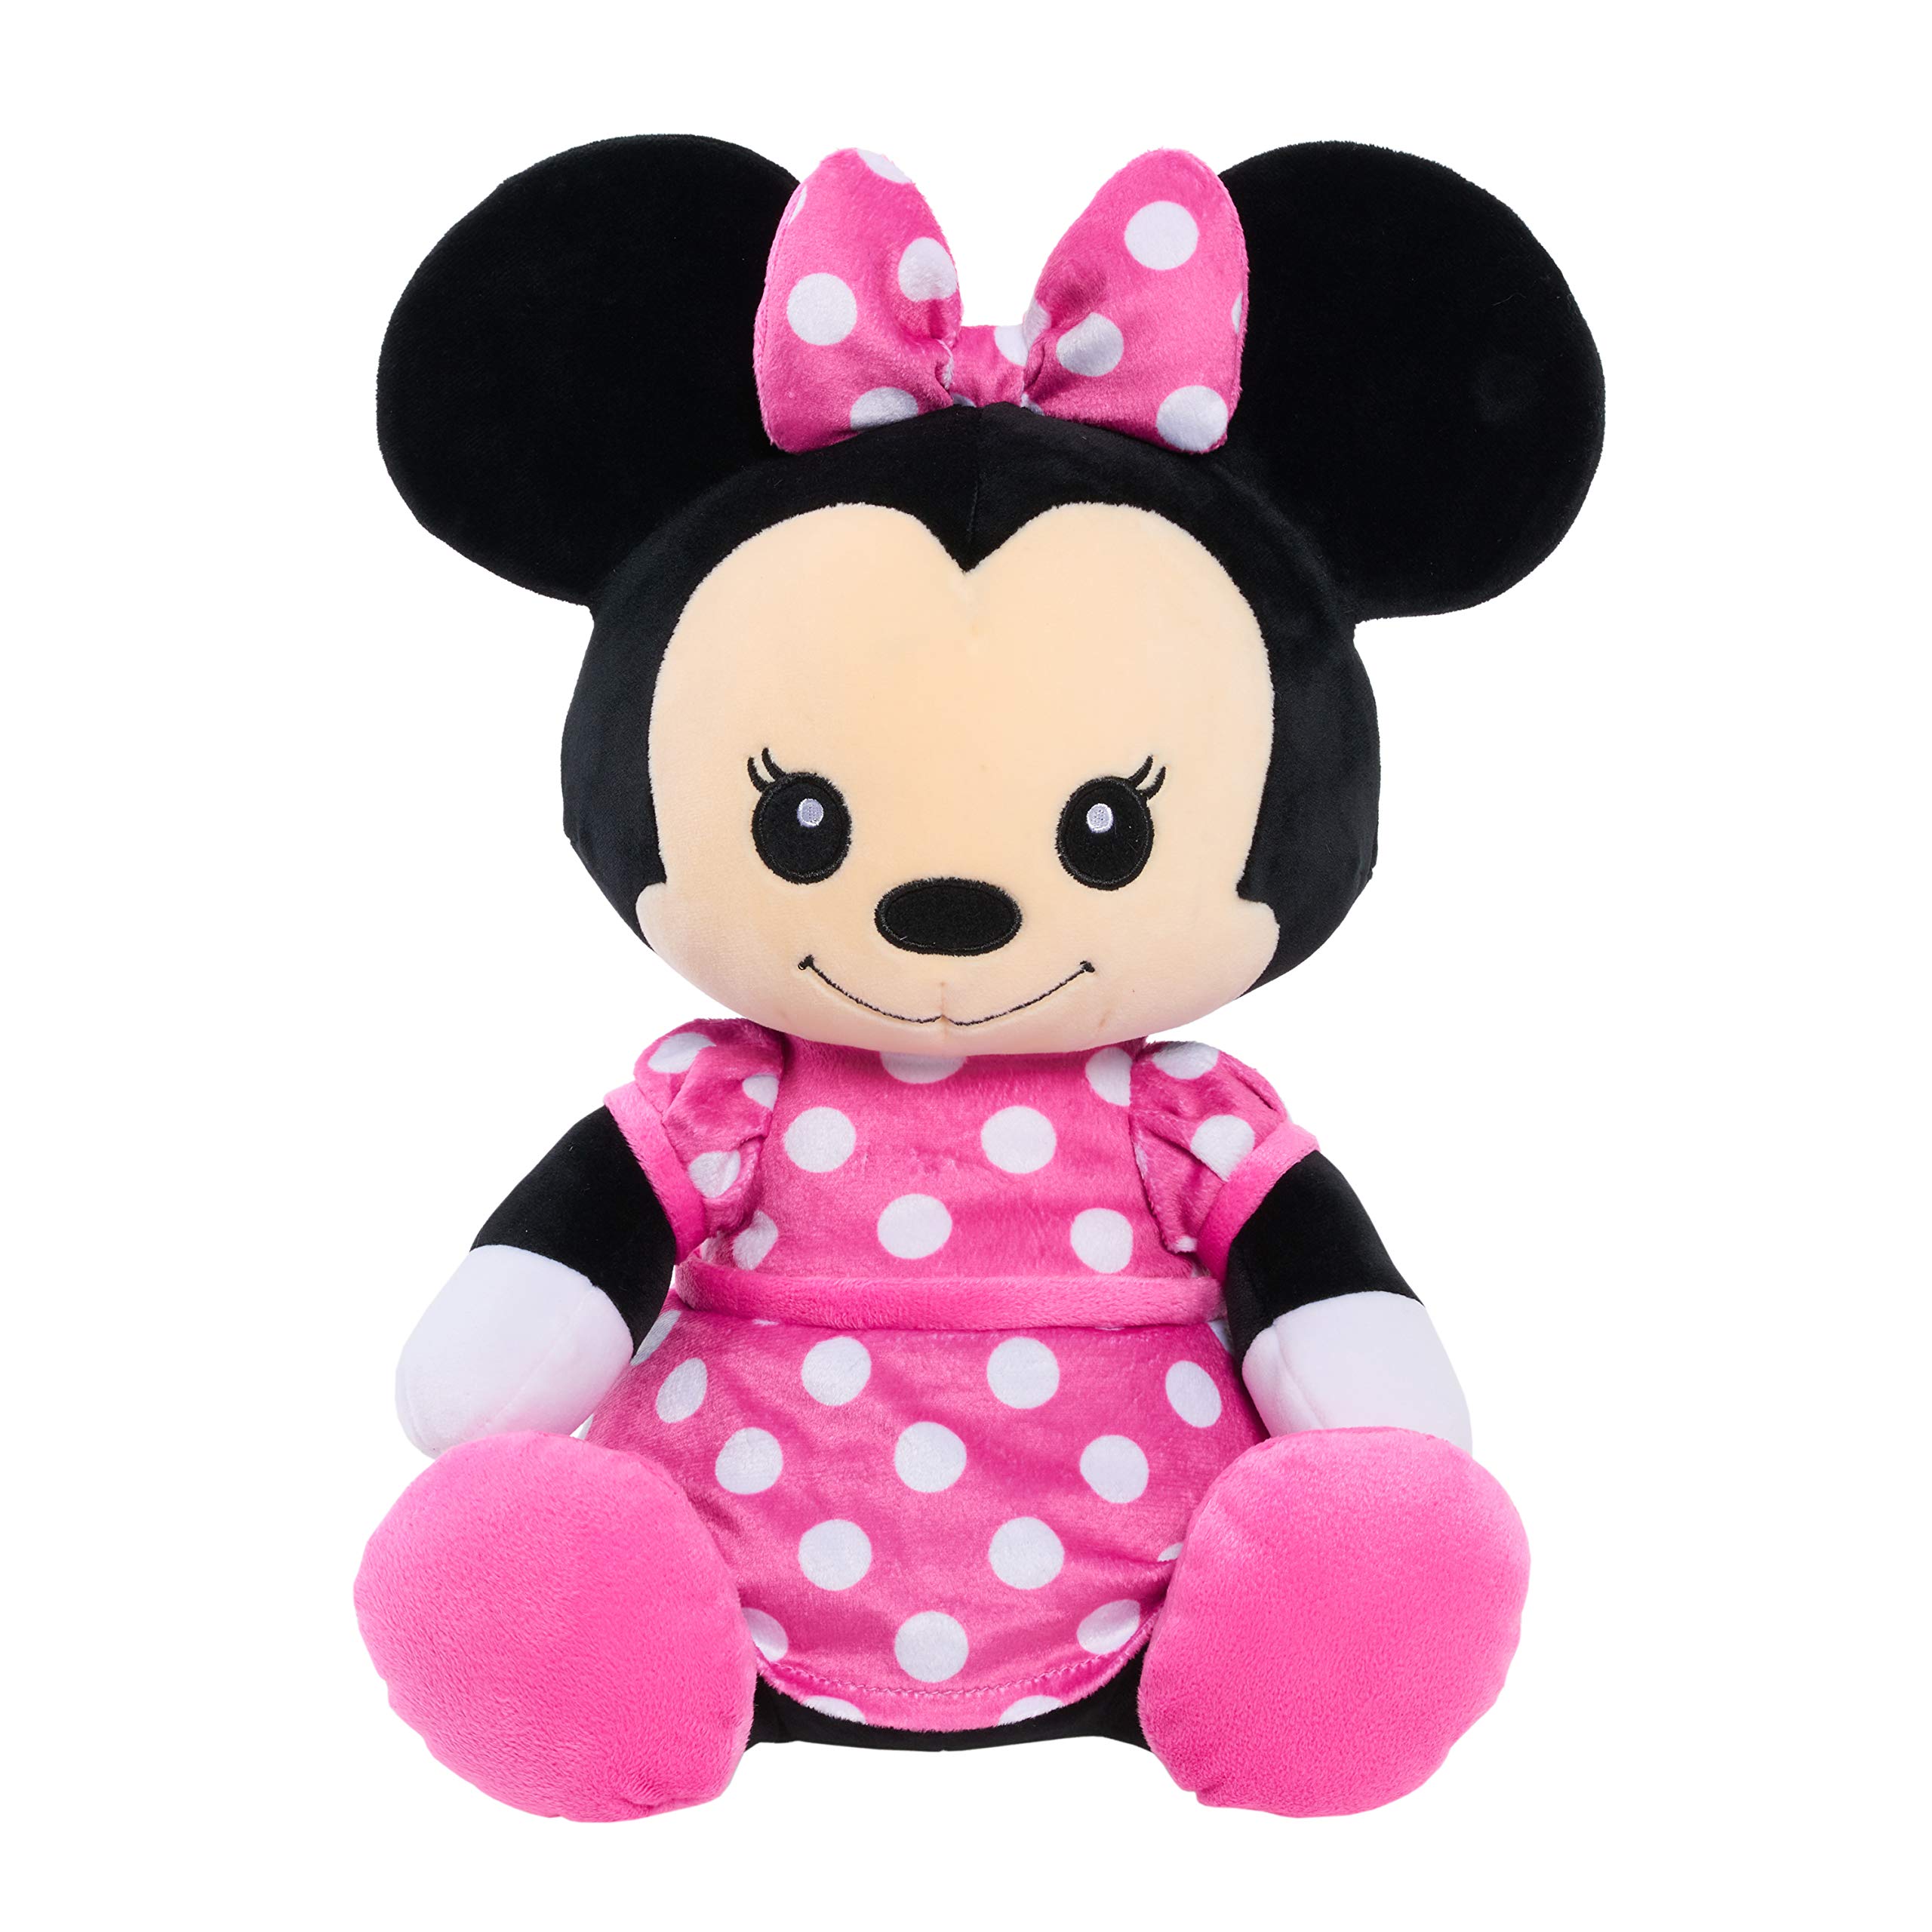 14" Disney Minnie Mouse Comfort Weighted Plush Toy $7.45 + Free Shipping w/ Prime or on $25+